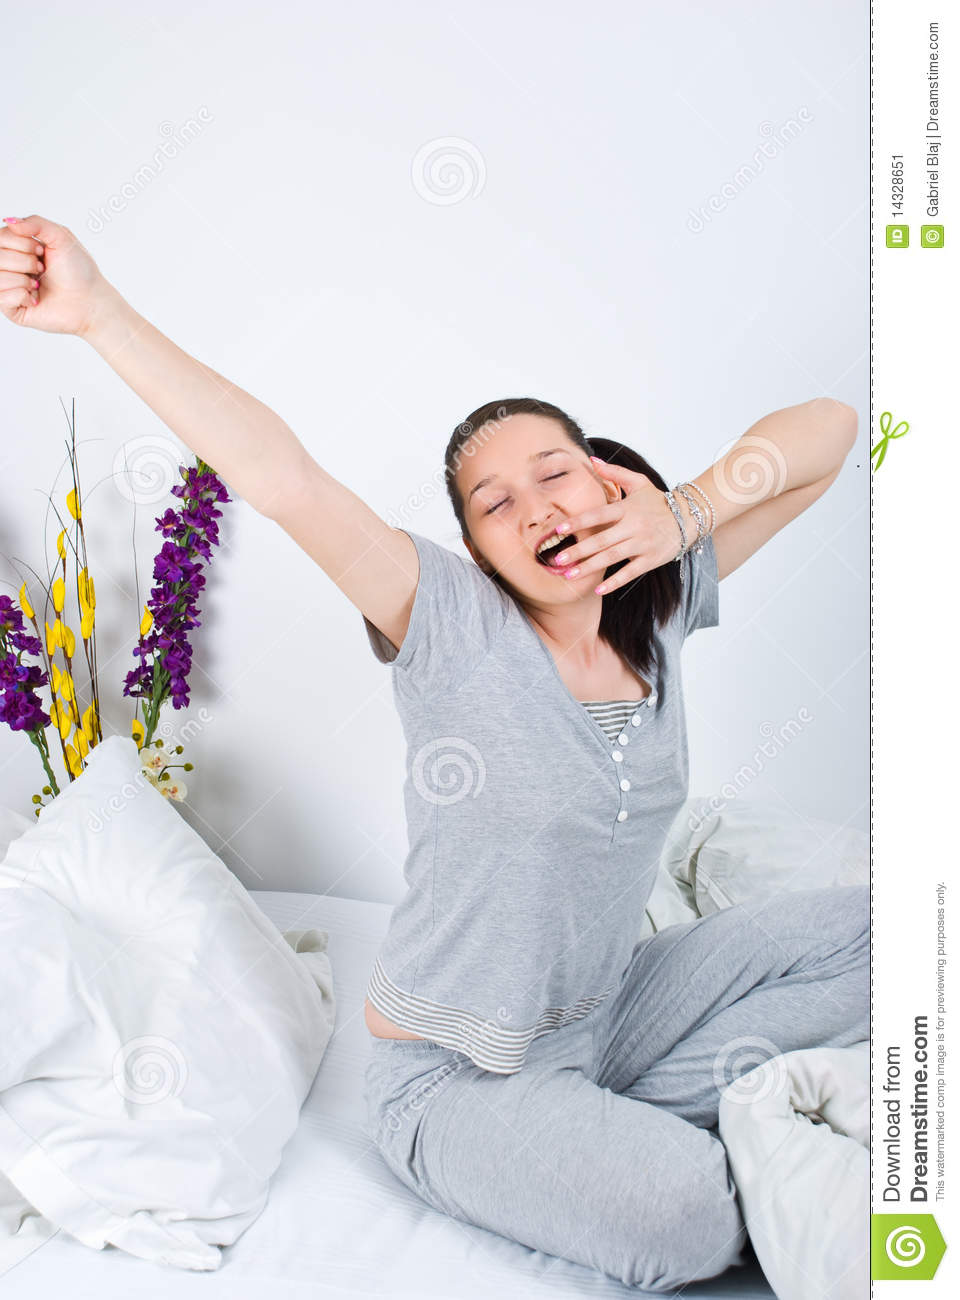 Young Woman Stretching And Yawning In The Morning Or Before Sleep On